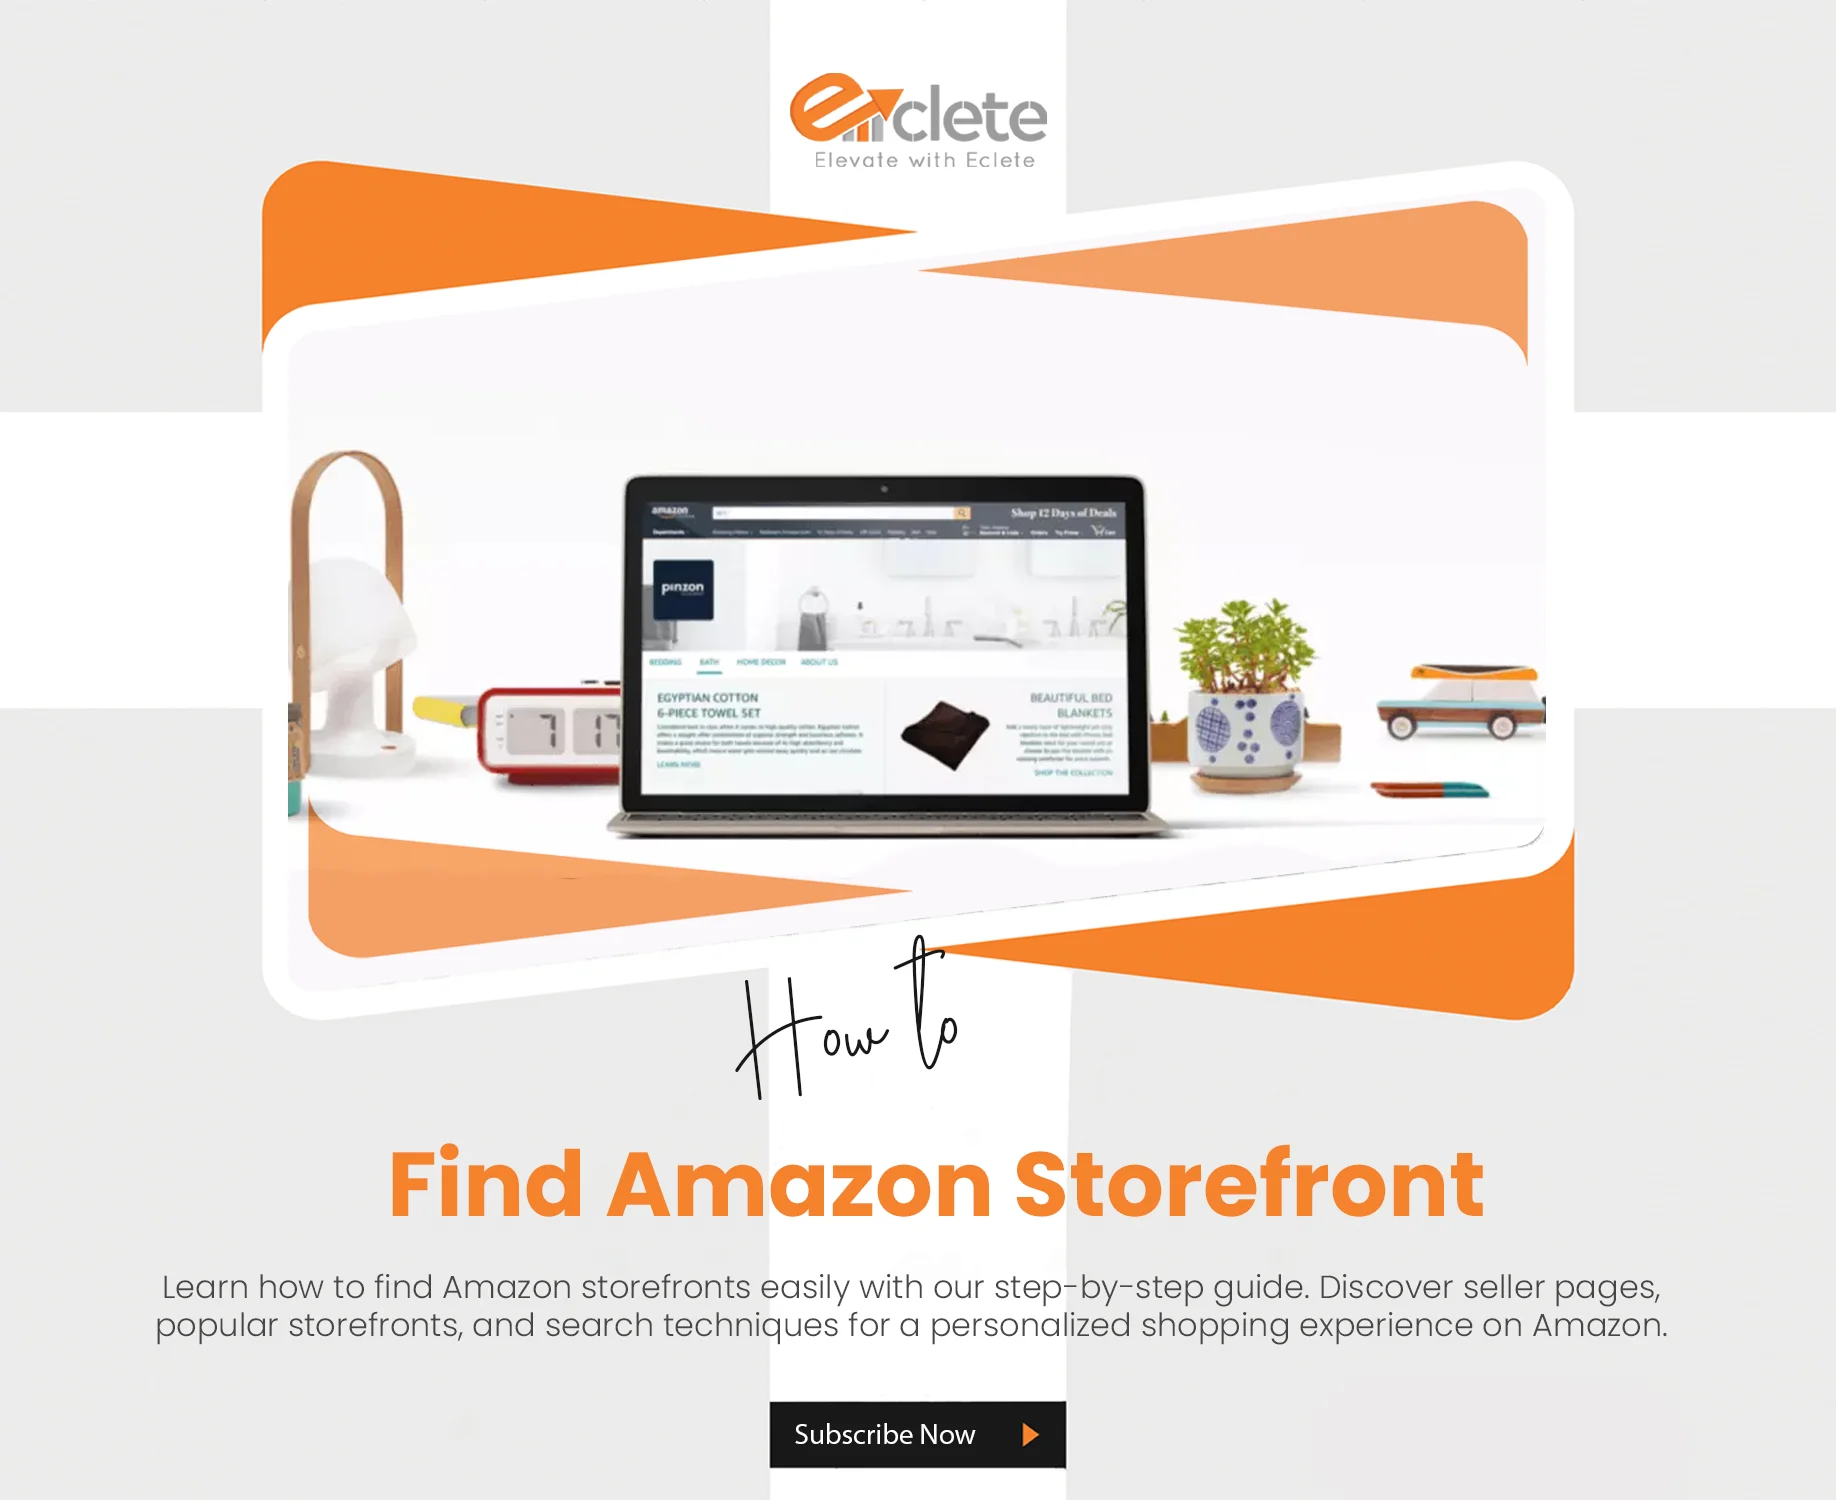 How to Find Amazon Storefront